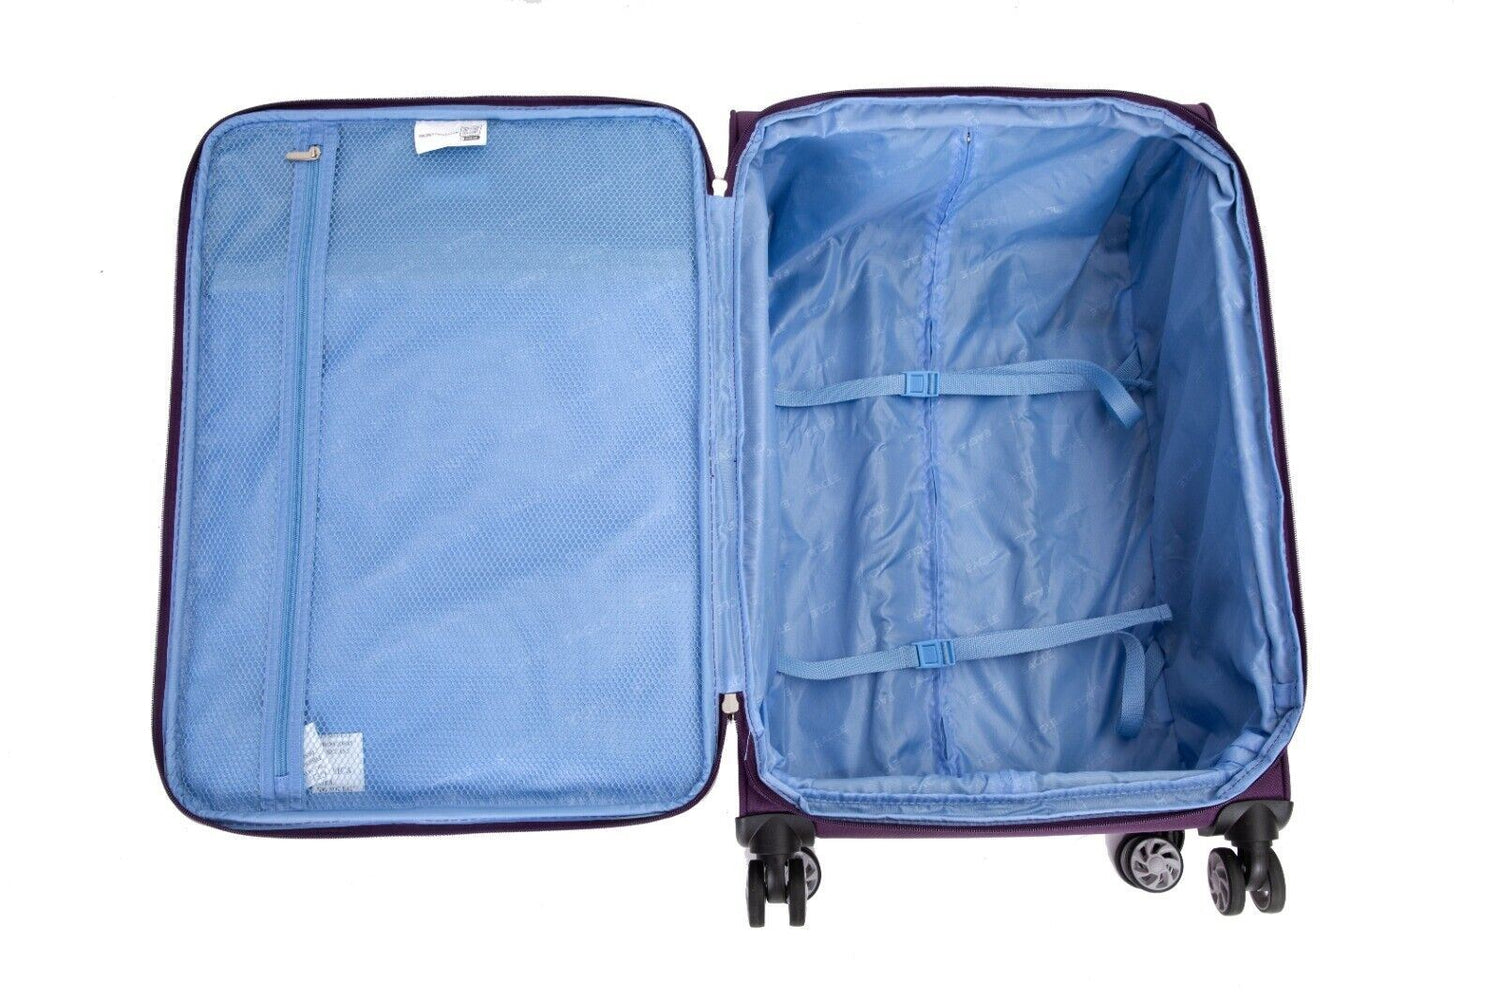 Lightweight Teal blue Cabin Suitcases 4 Wheel Luggage Travel Bag